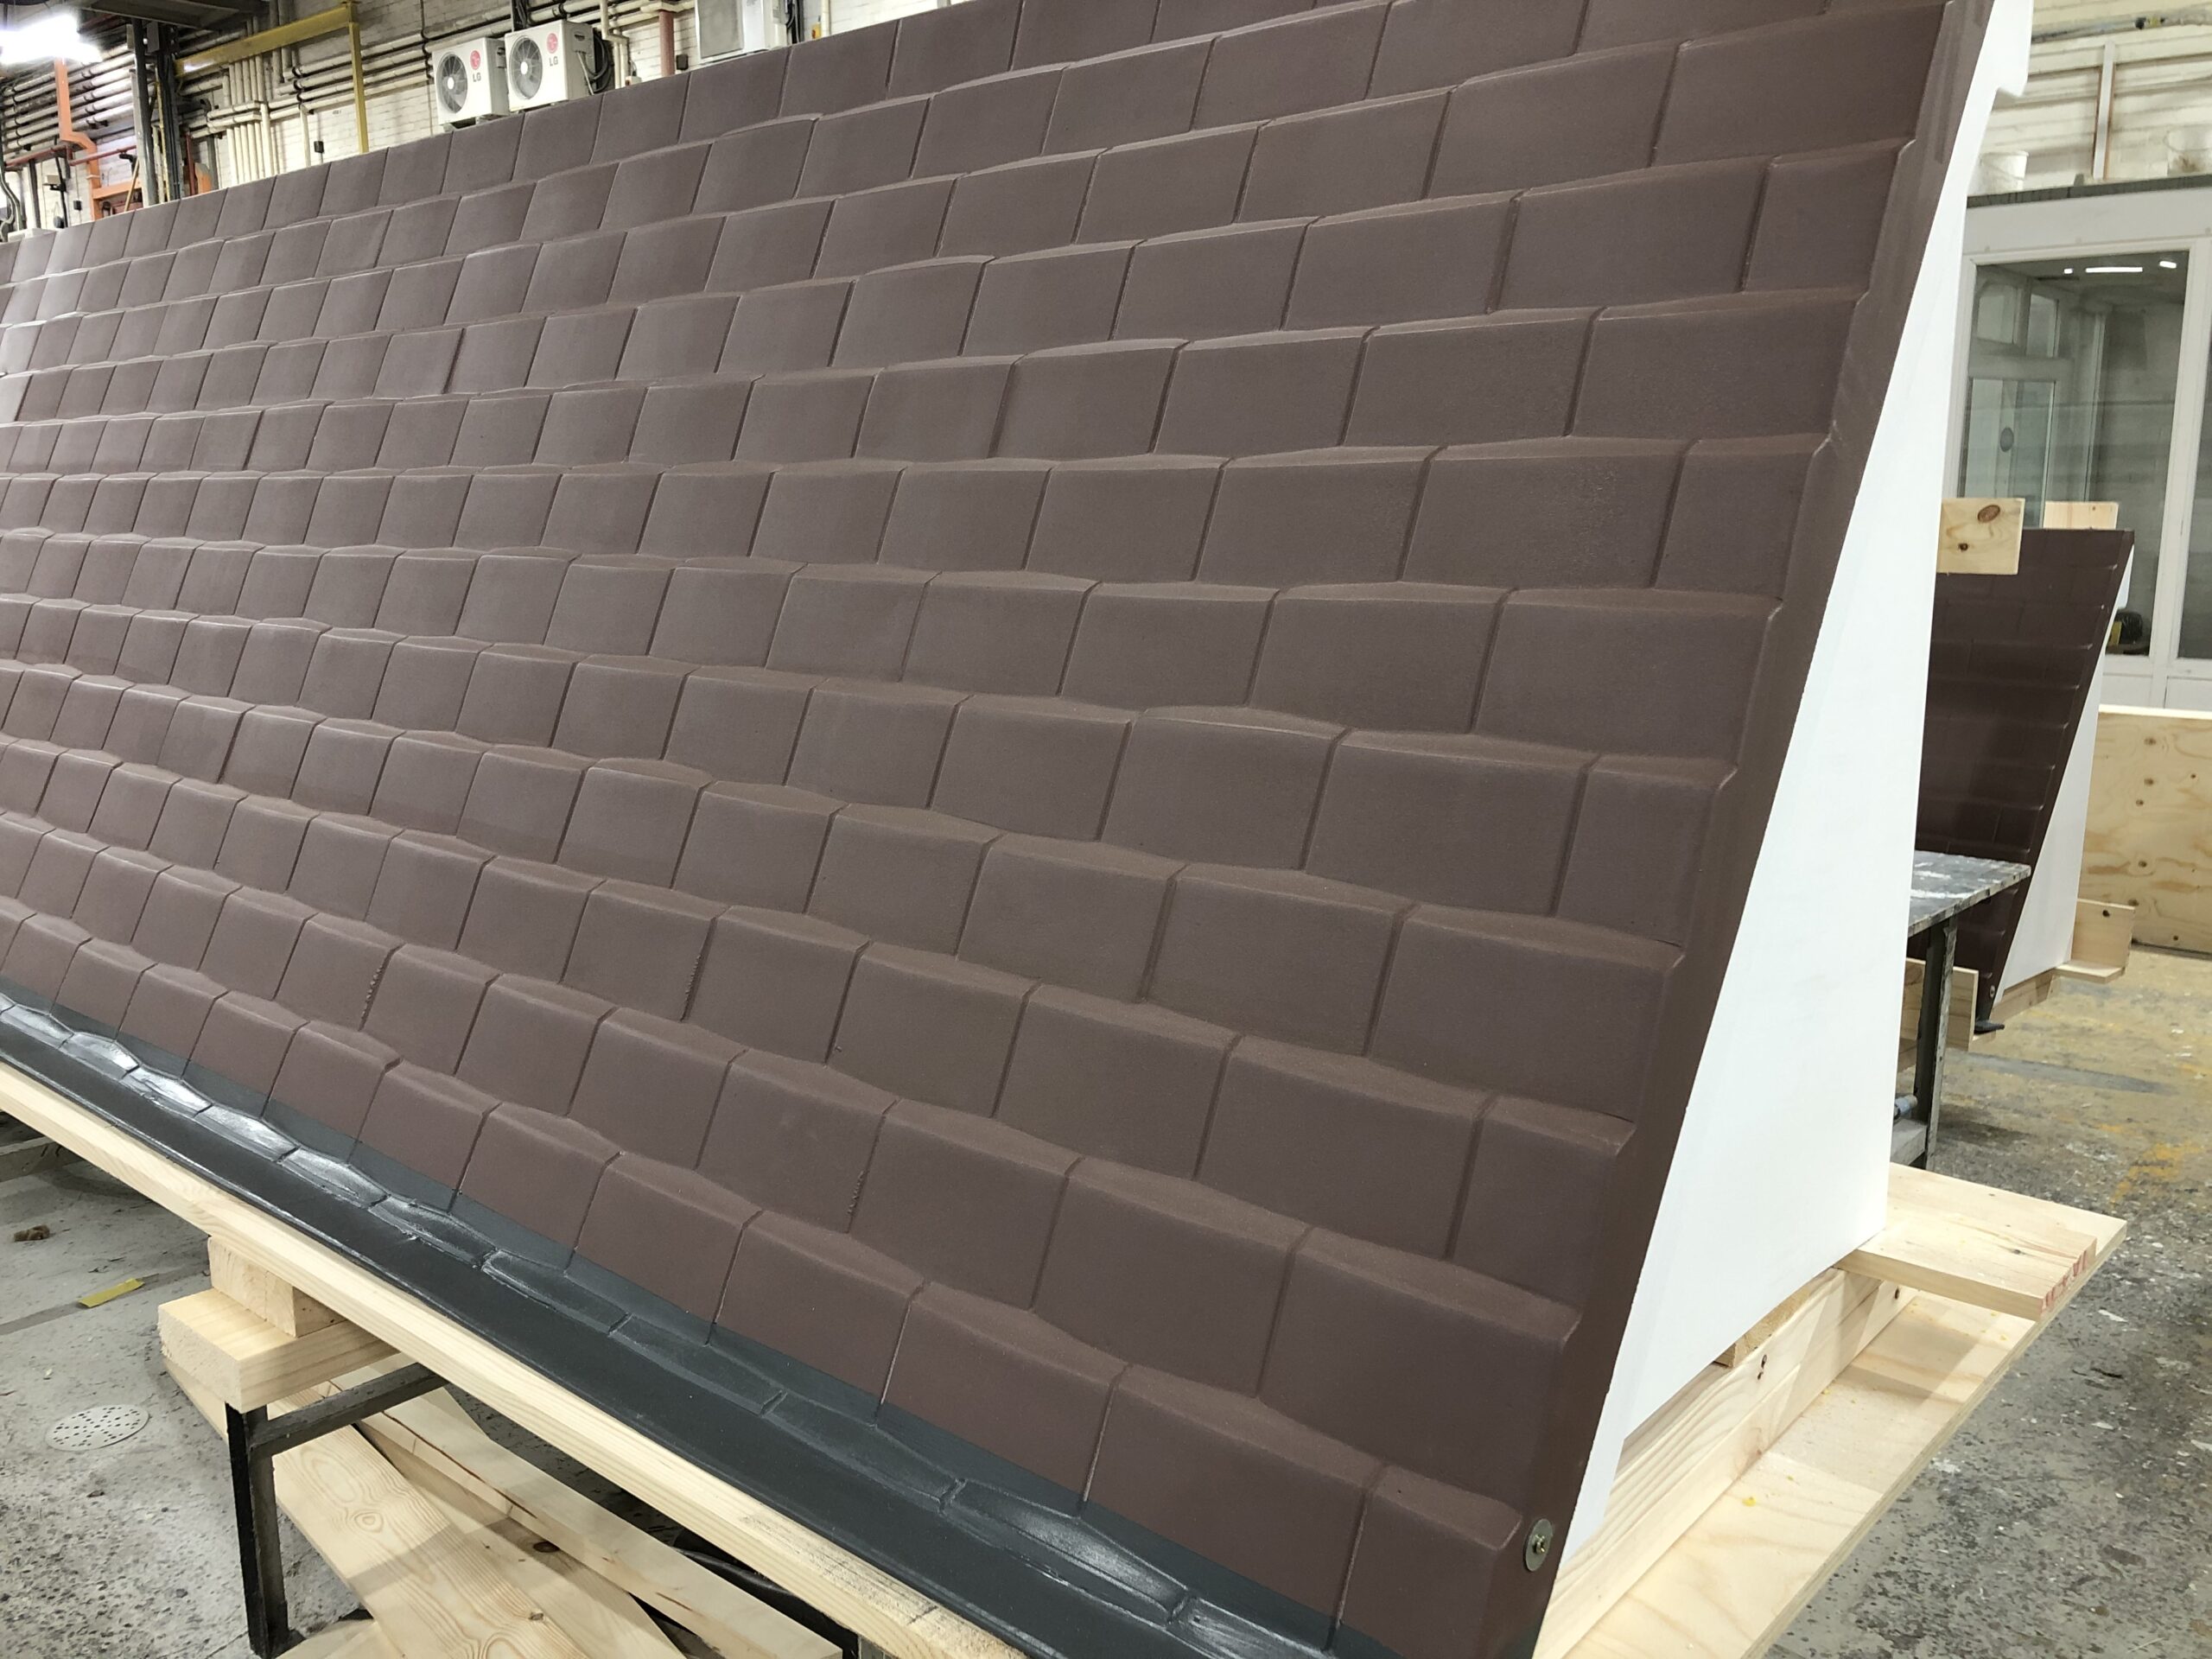 Stormking Manufacture Large GRP Lean-to GRP Tiled Products